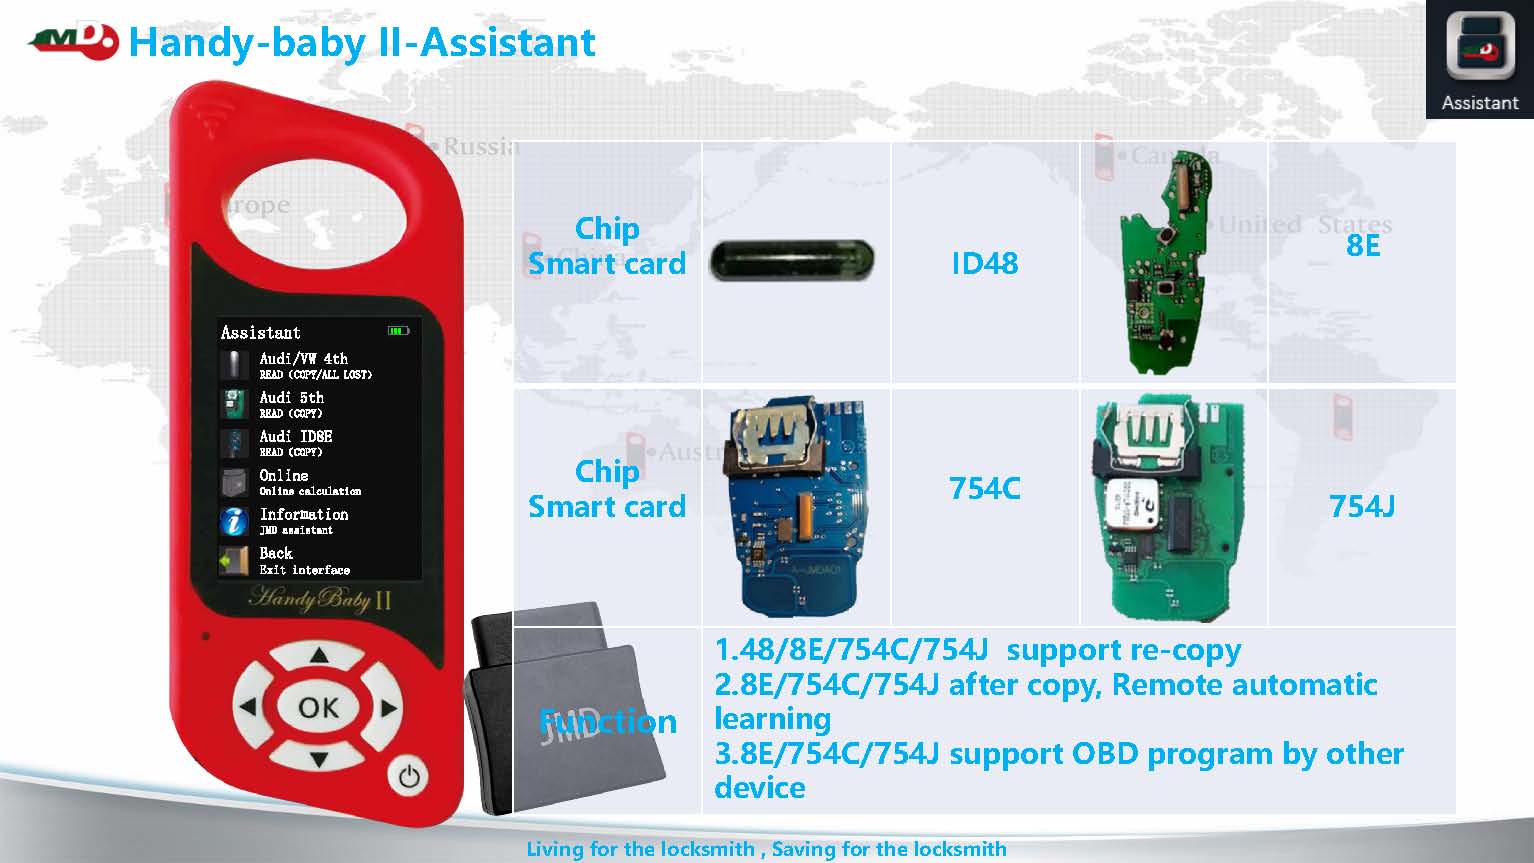 jmd-handy-baby-2-and -jmd-assistant-guide-01